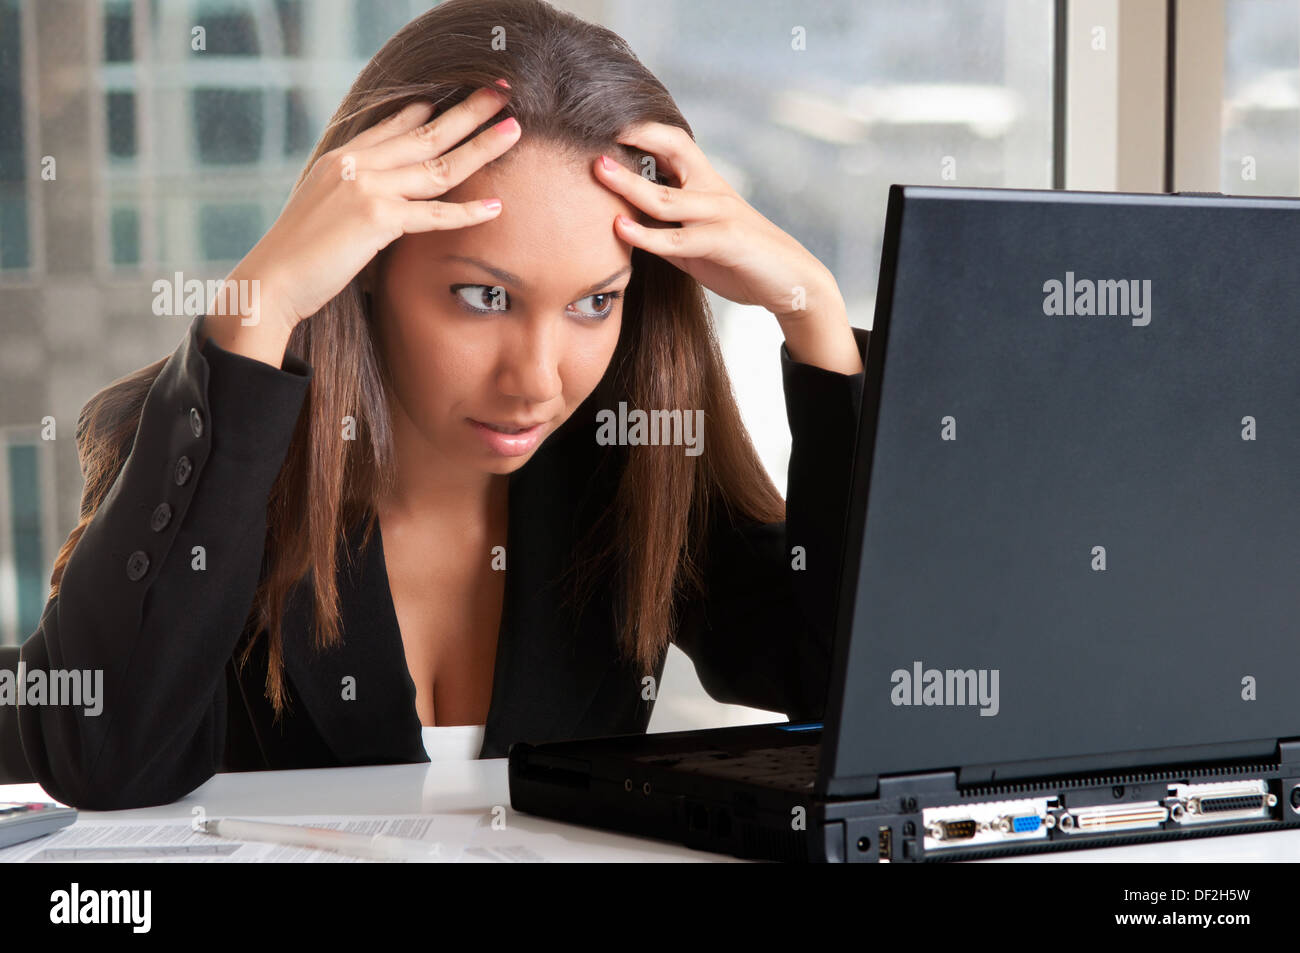 Worried businesswoman looking at a computer screen in an office Stock Photo